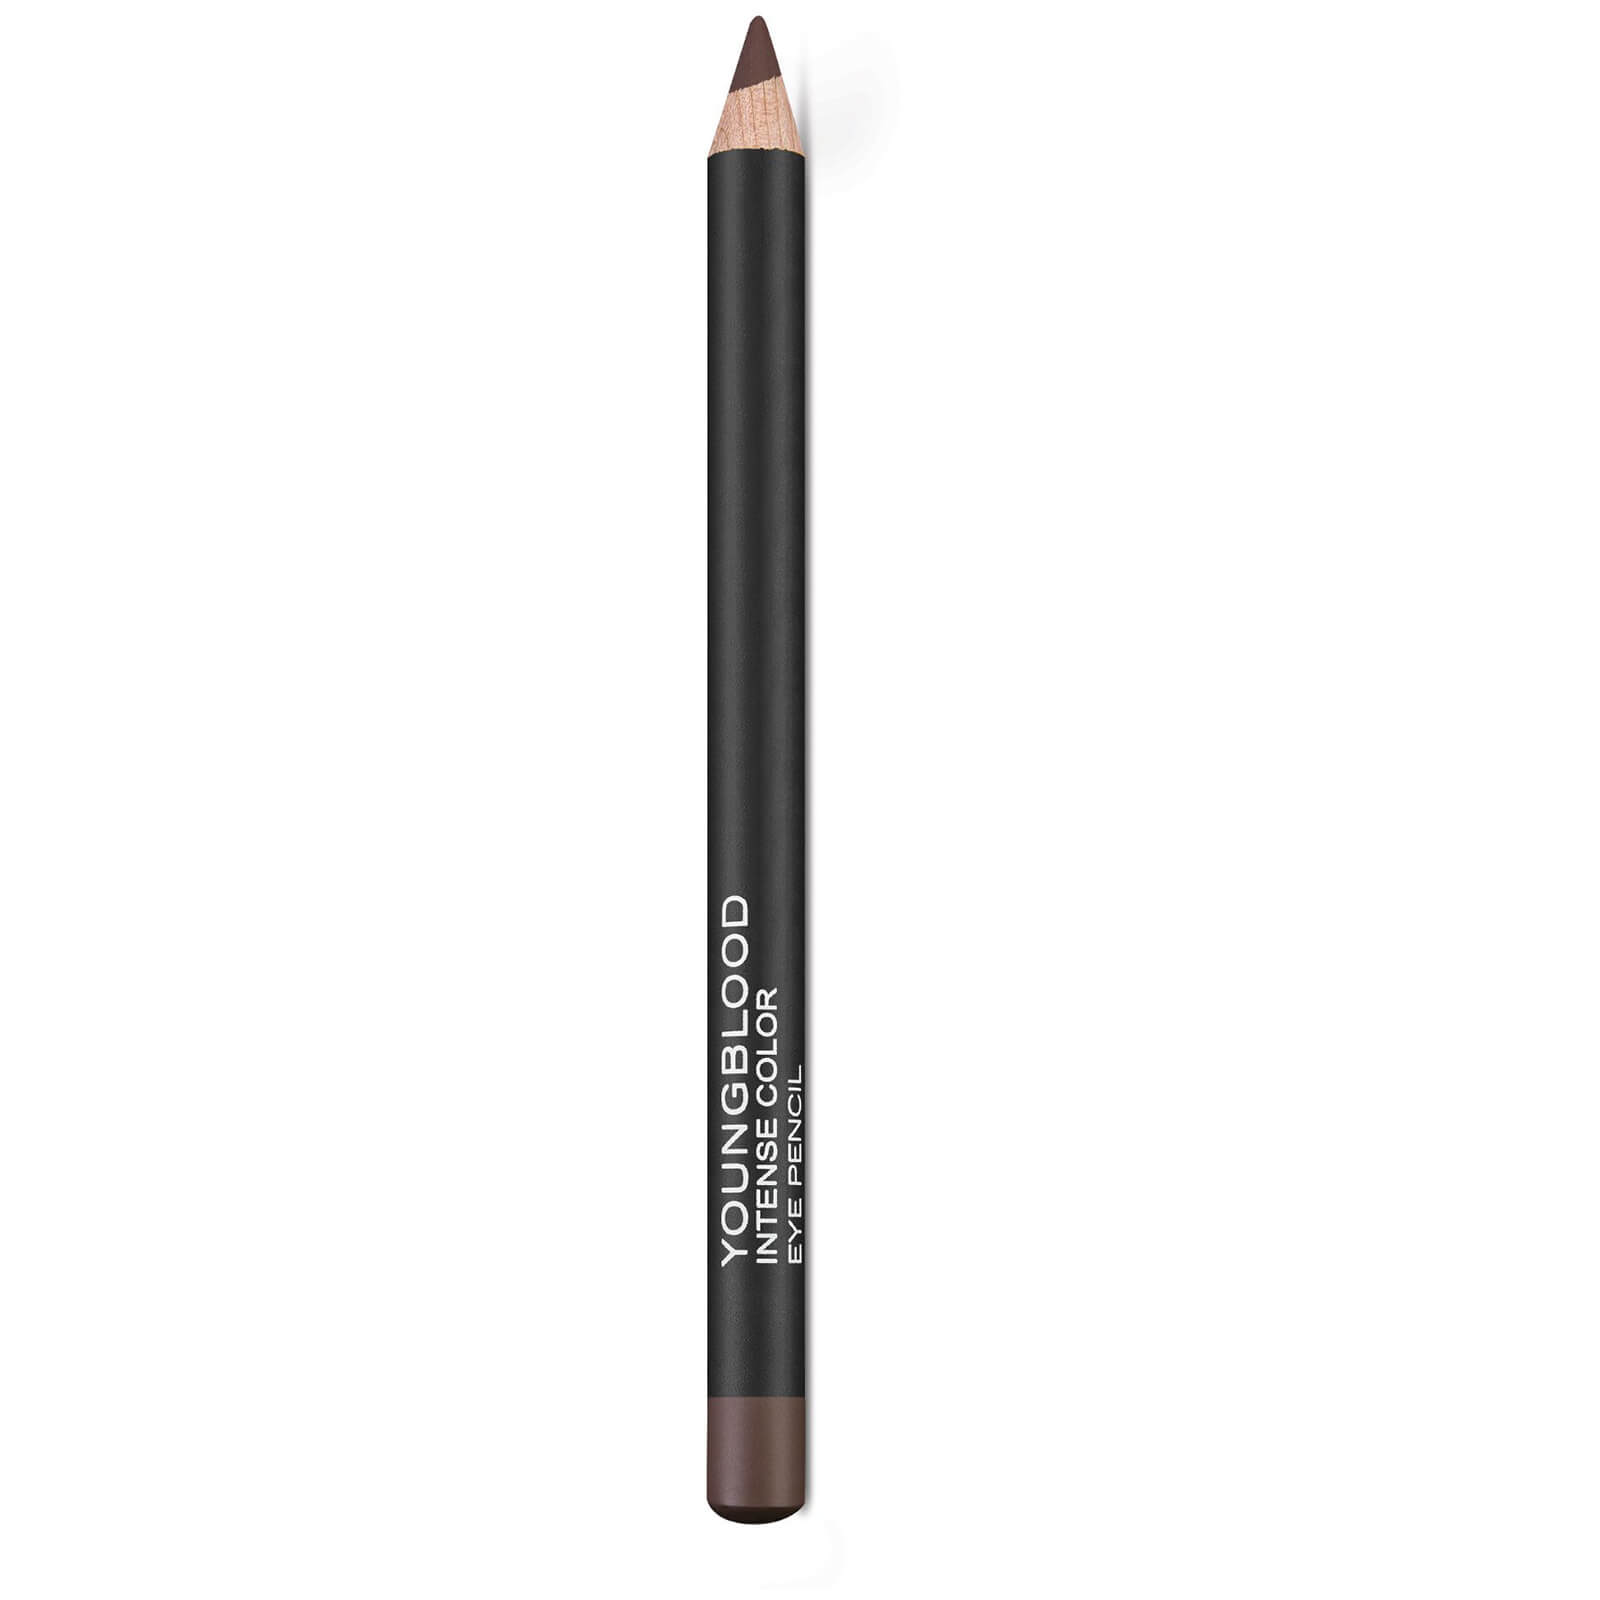 Youngblood Mineral Cosmetics Youngblood Eye Liner Pencil 1.1g (Various Shades) - Chestnut